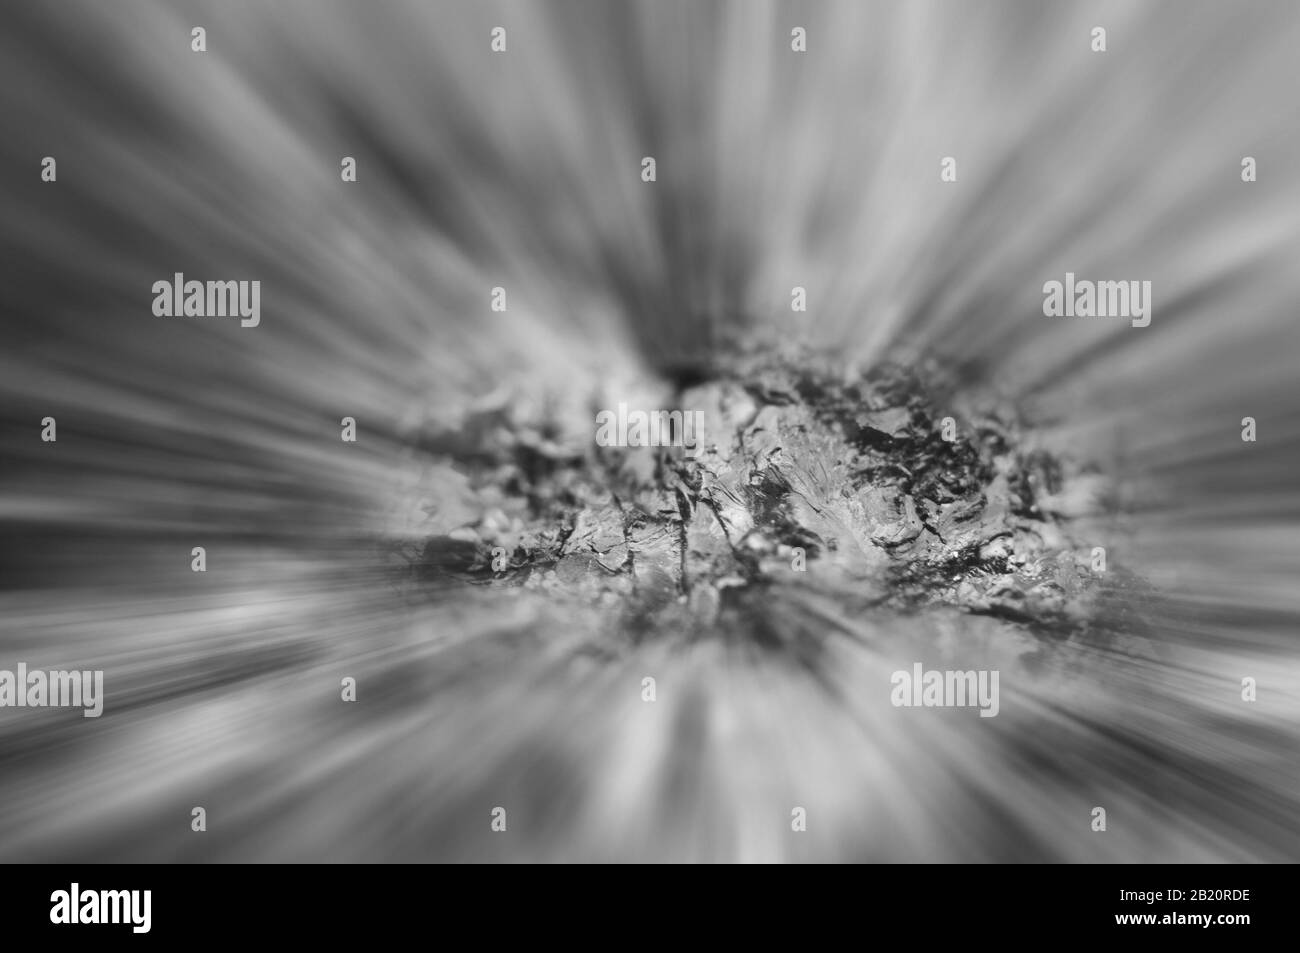 Black and white photography. Beautiful black and white background of crystals and abstract rays. Macro. Stock Photo